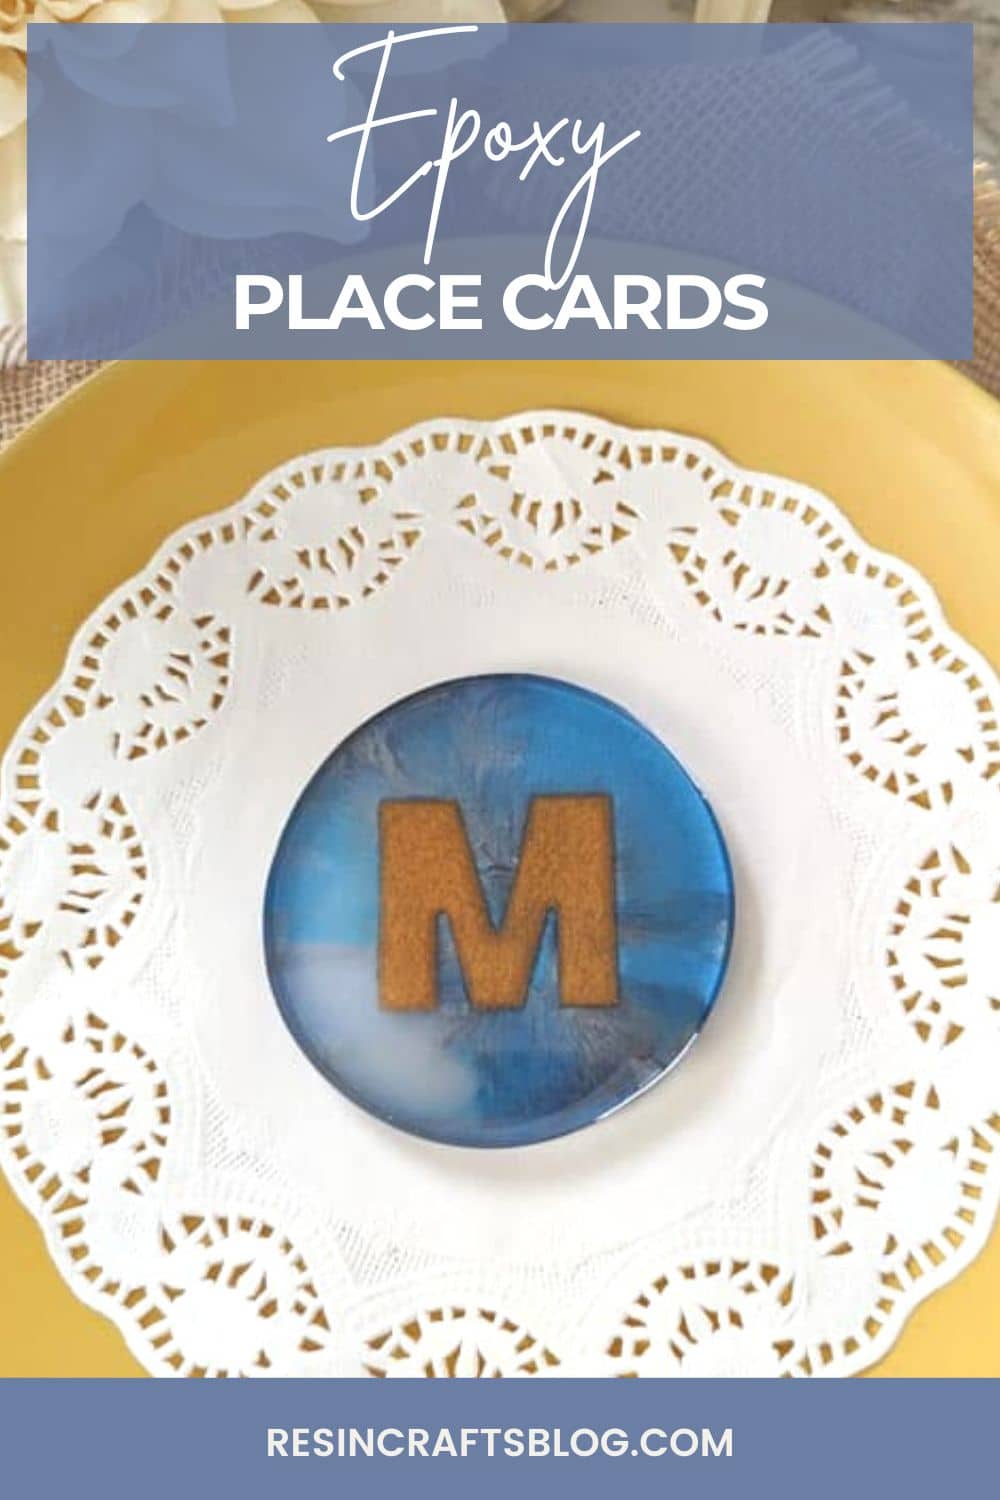 Learn how to make monogram resin coasters. To put a twist on personalized coasters, I'm adding a resin letter to the center of each one. via @resincraftsblog